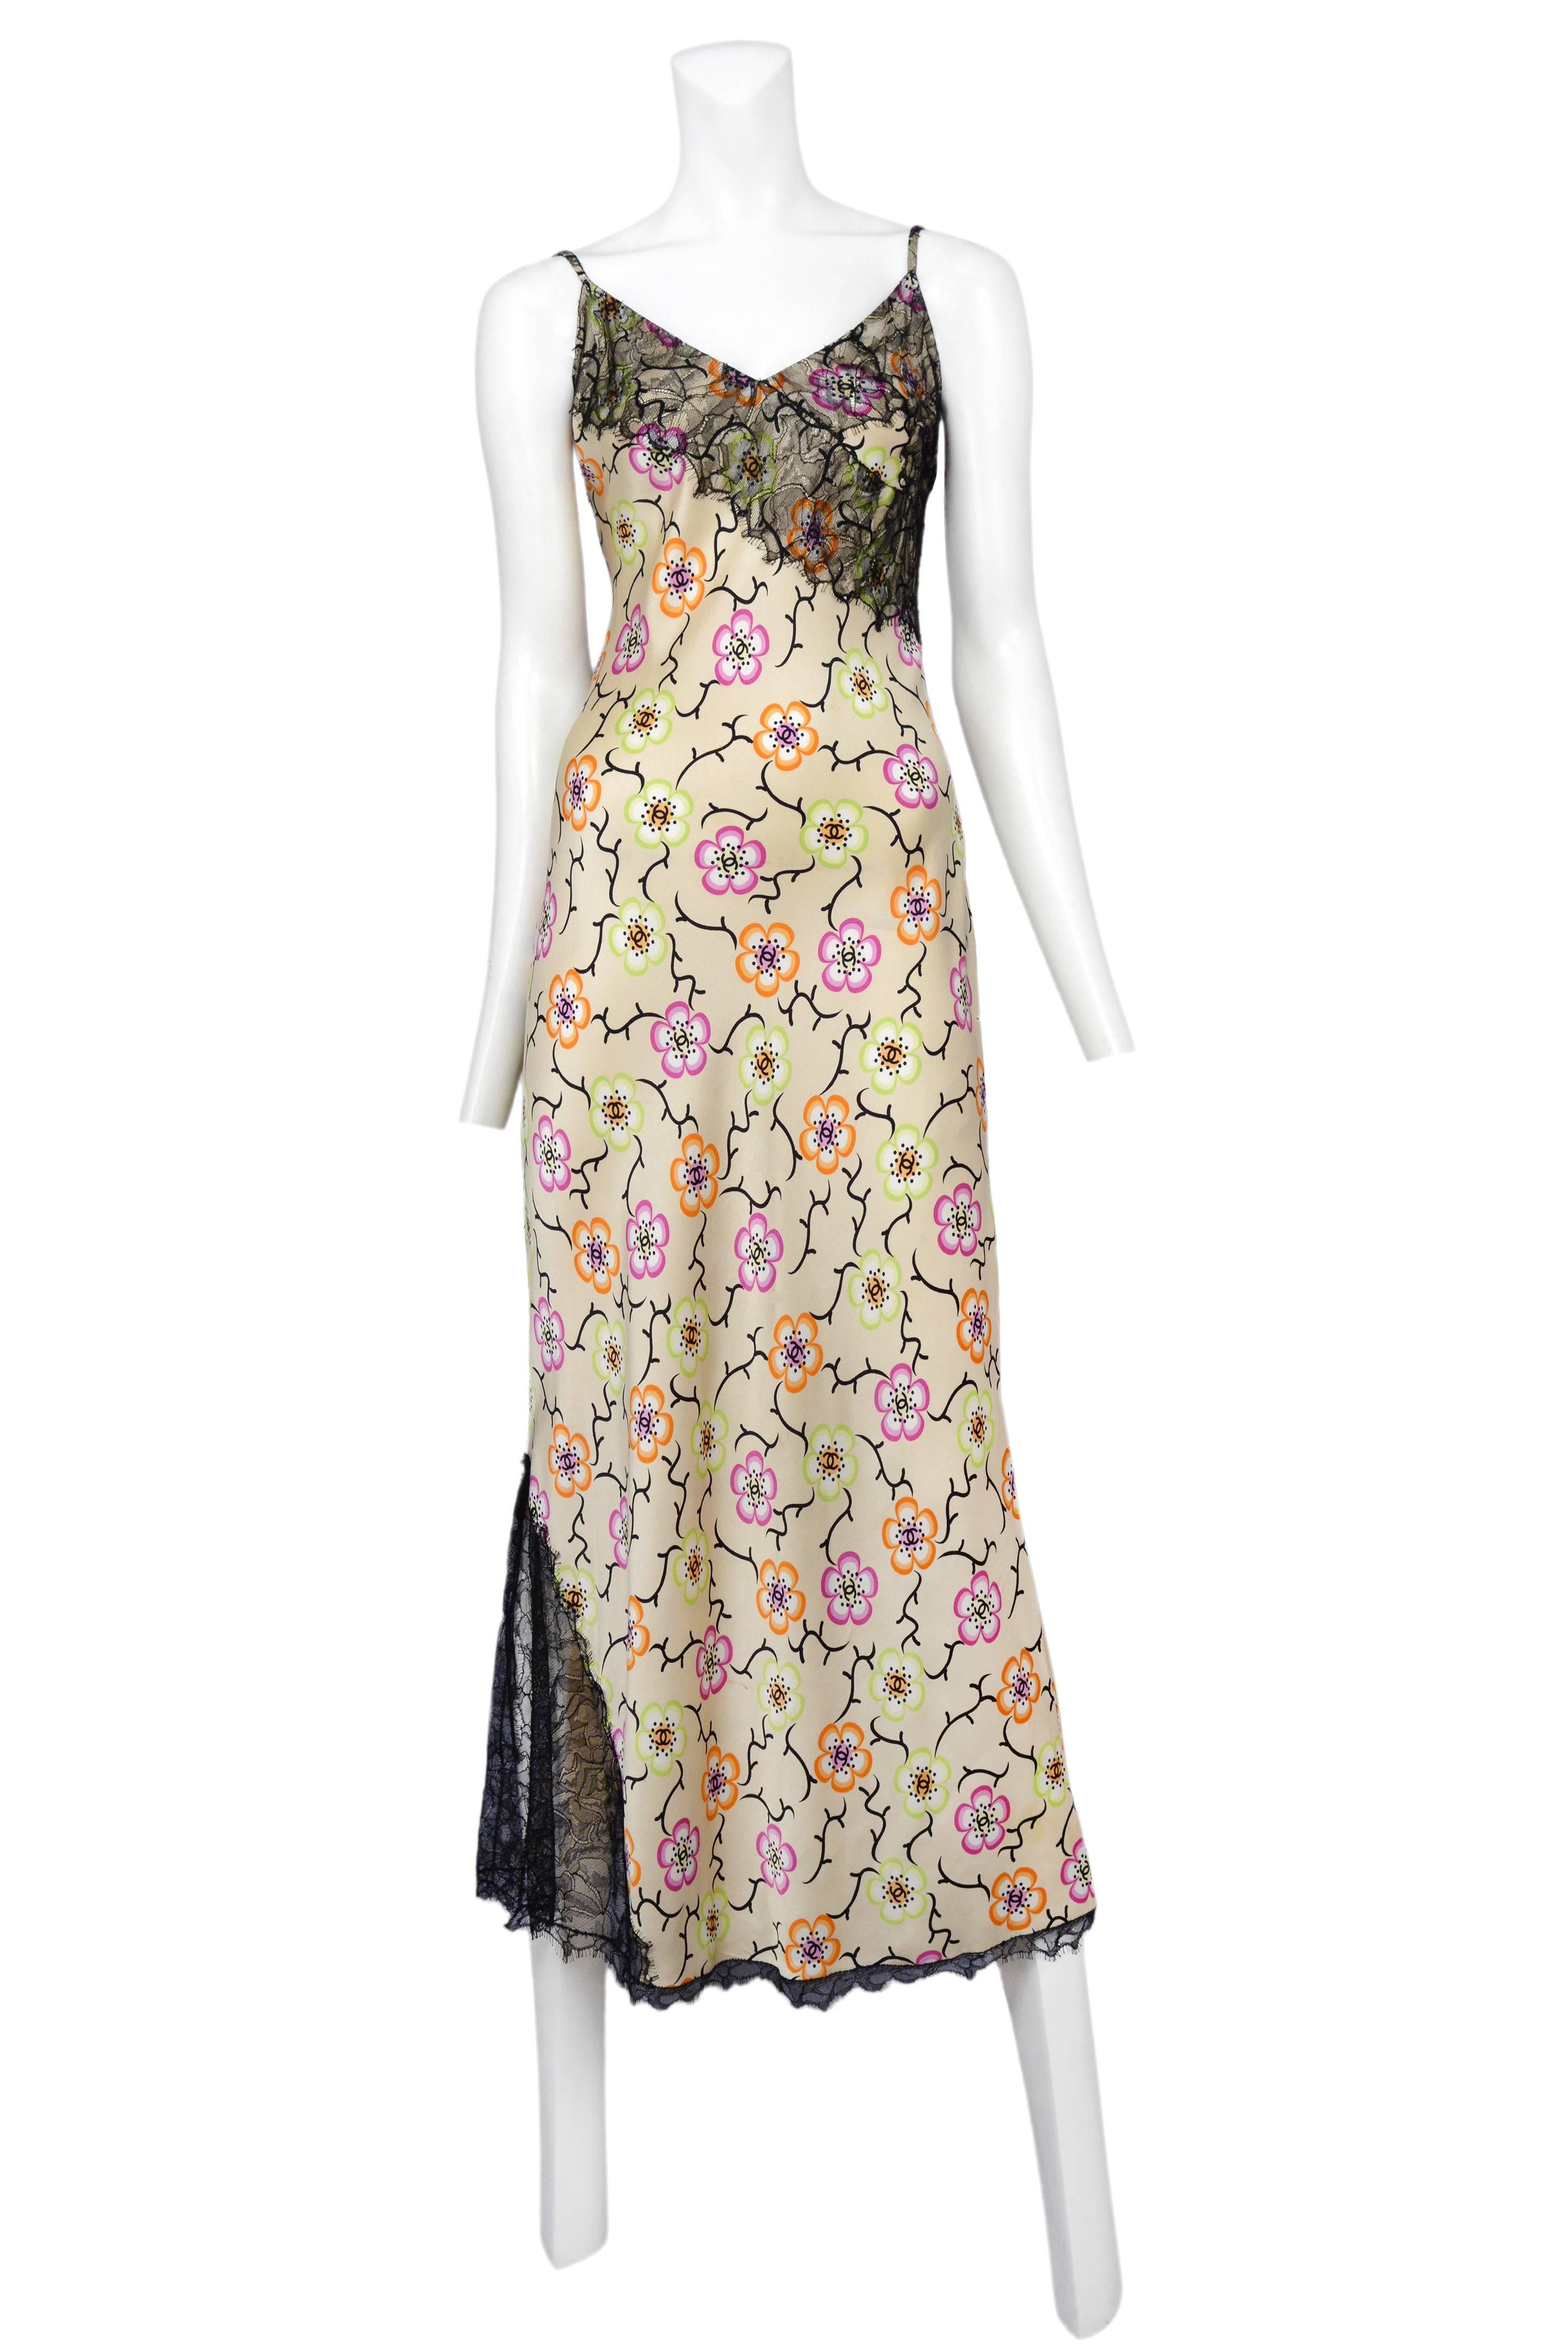 Vintage Chanel cream silk slip dress featuring black lace paneling near the hem of the right side as well as at the bust and an allover pink, orange and lime green floral print.
Please inquire for additional images.